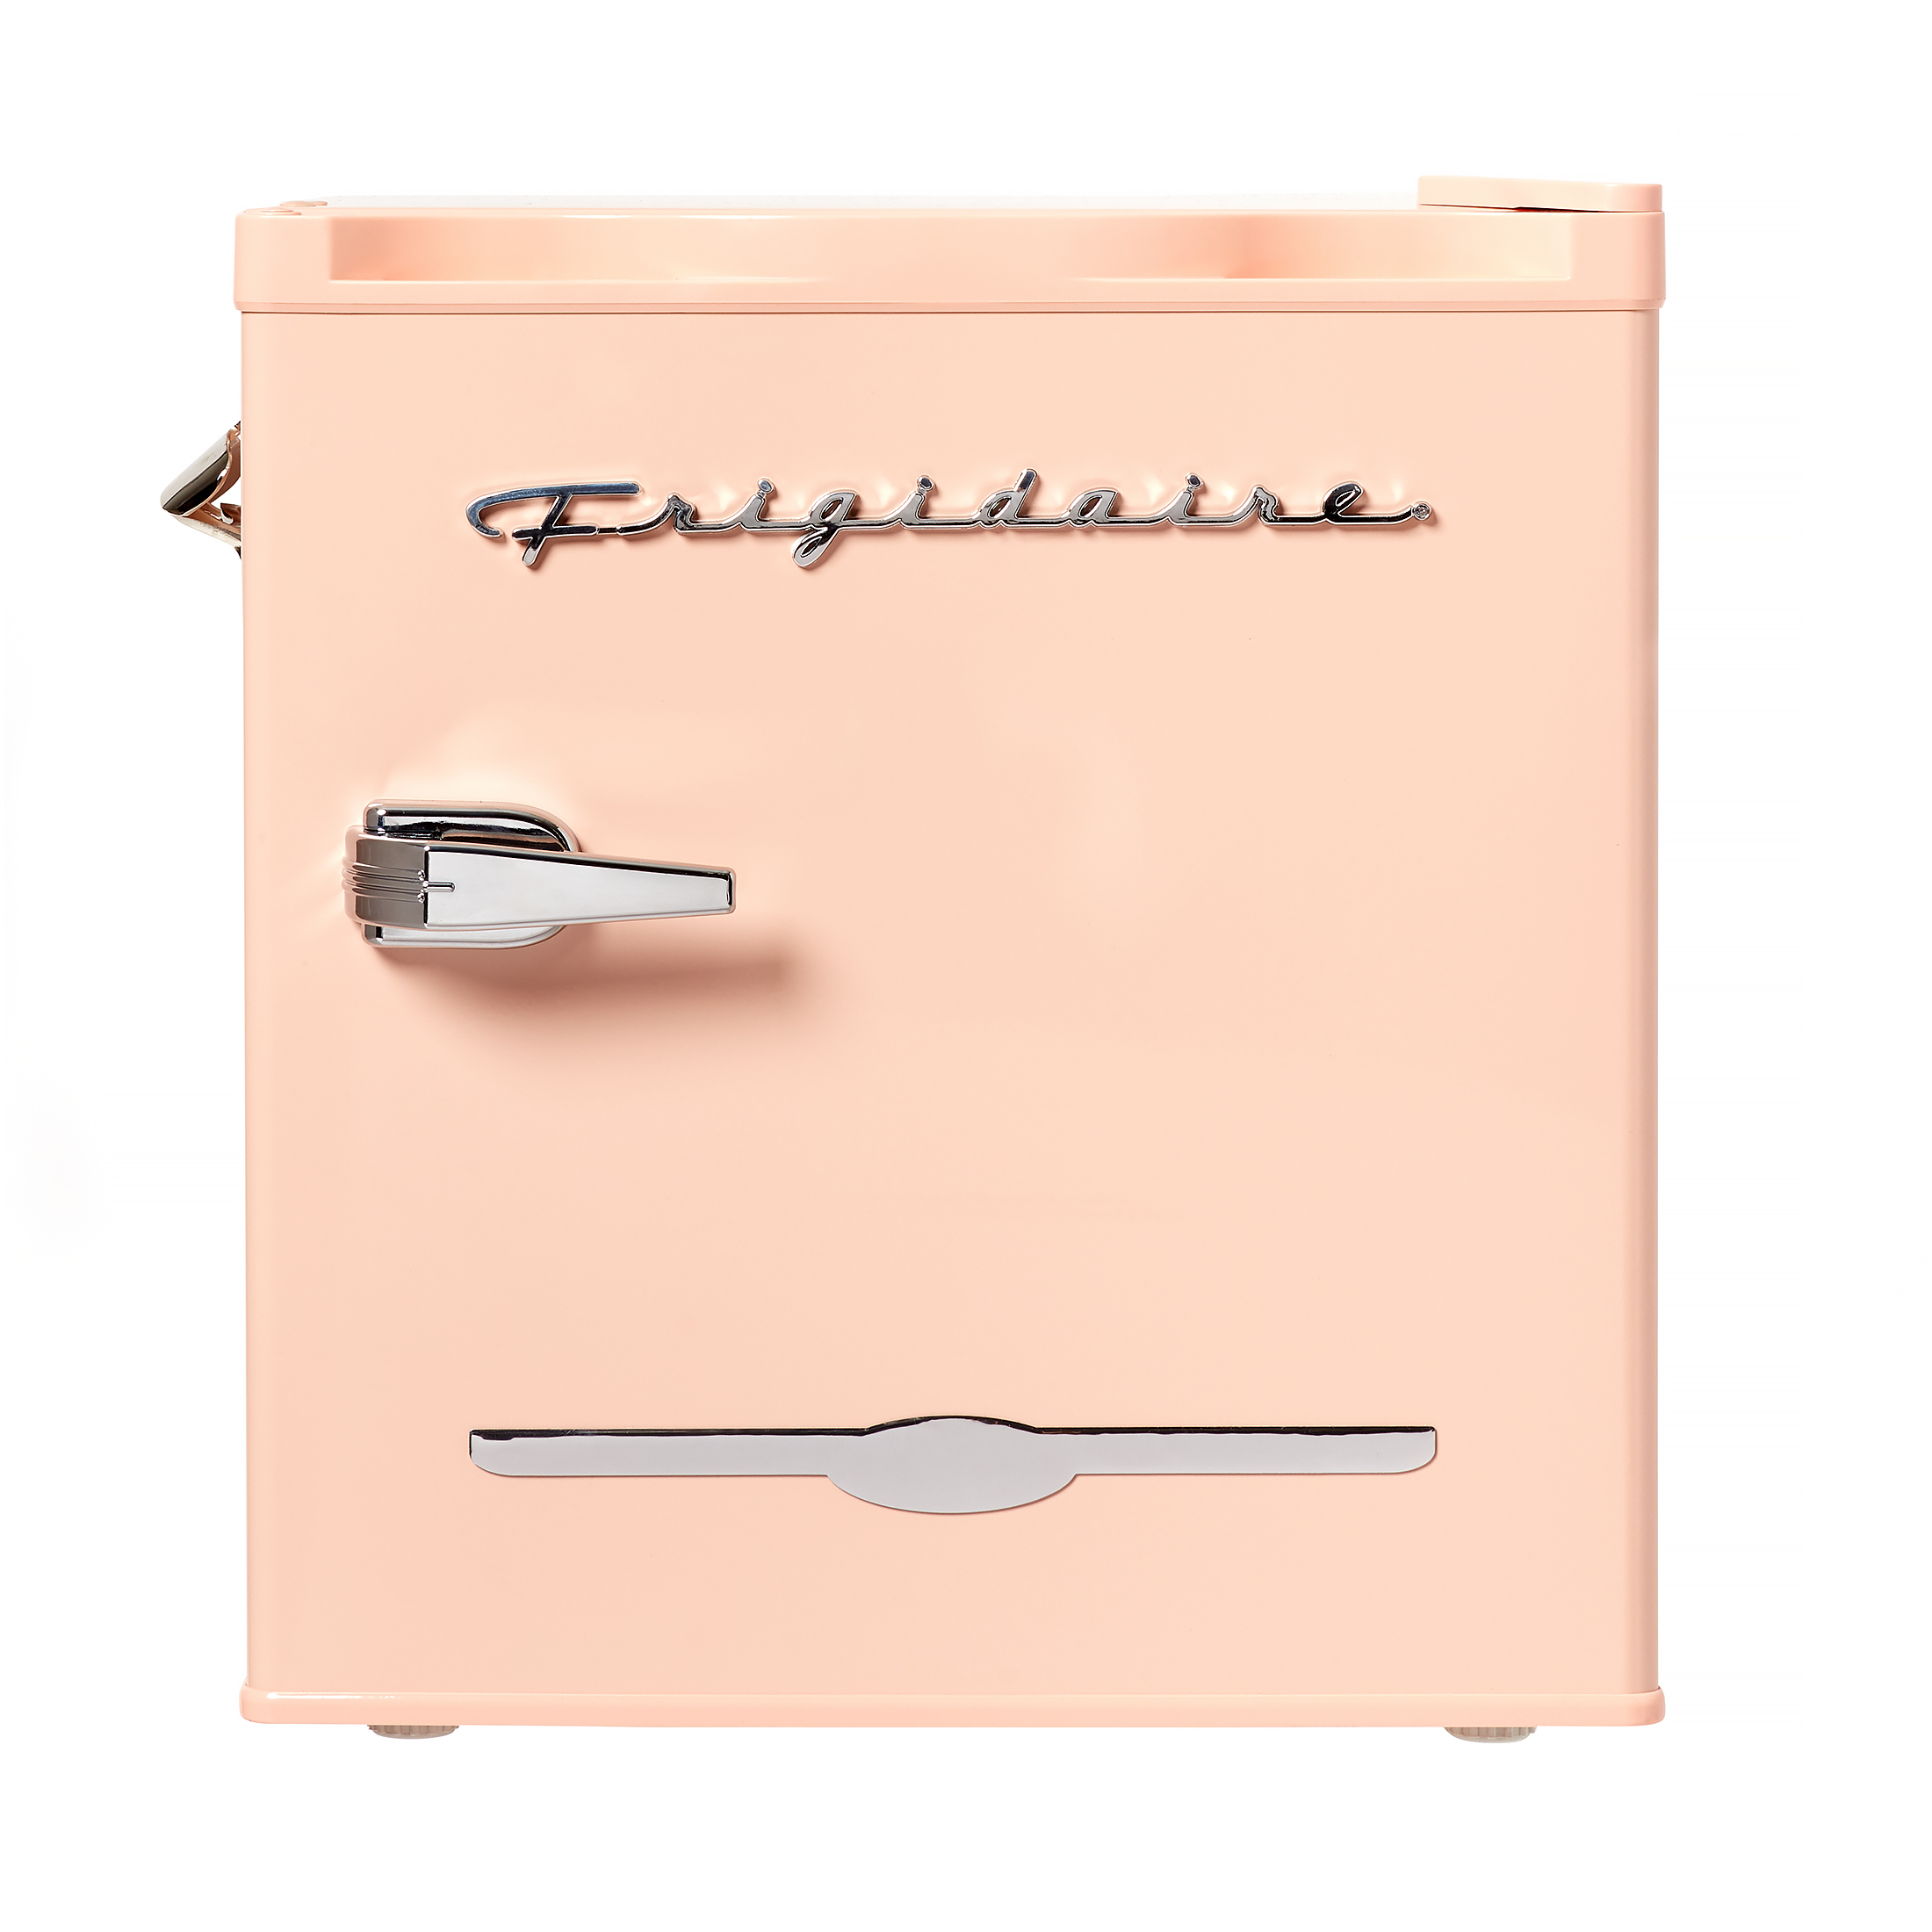 Frigidaire 1.6 Cu ft. Retro Compact Refrigerator with Side Bottle Opener, Coral - image 1 of 7